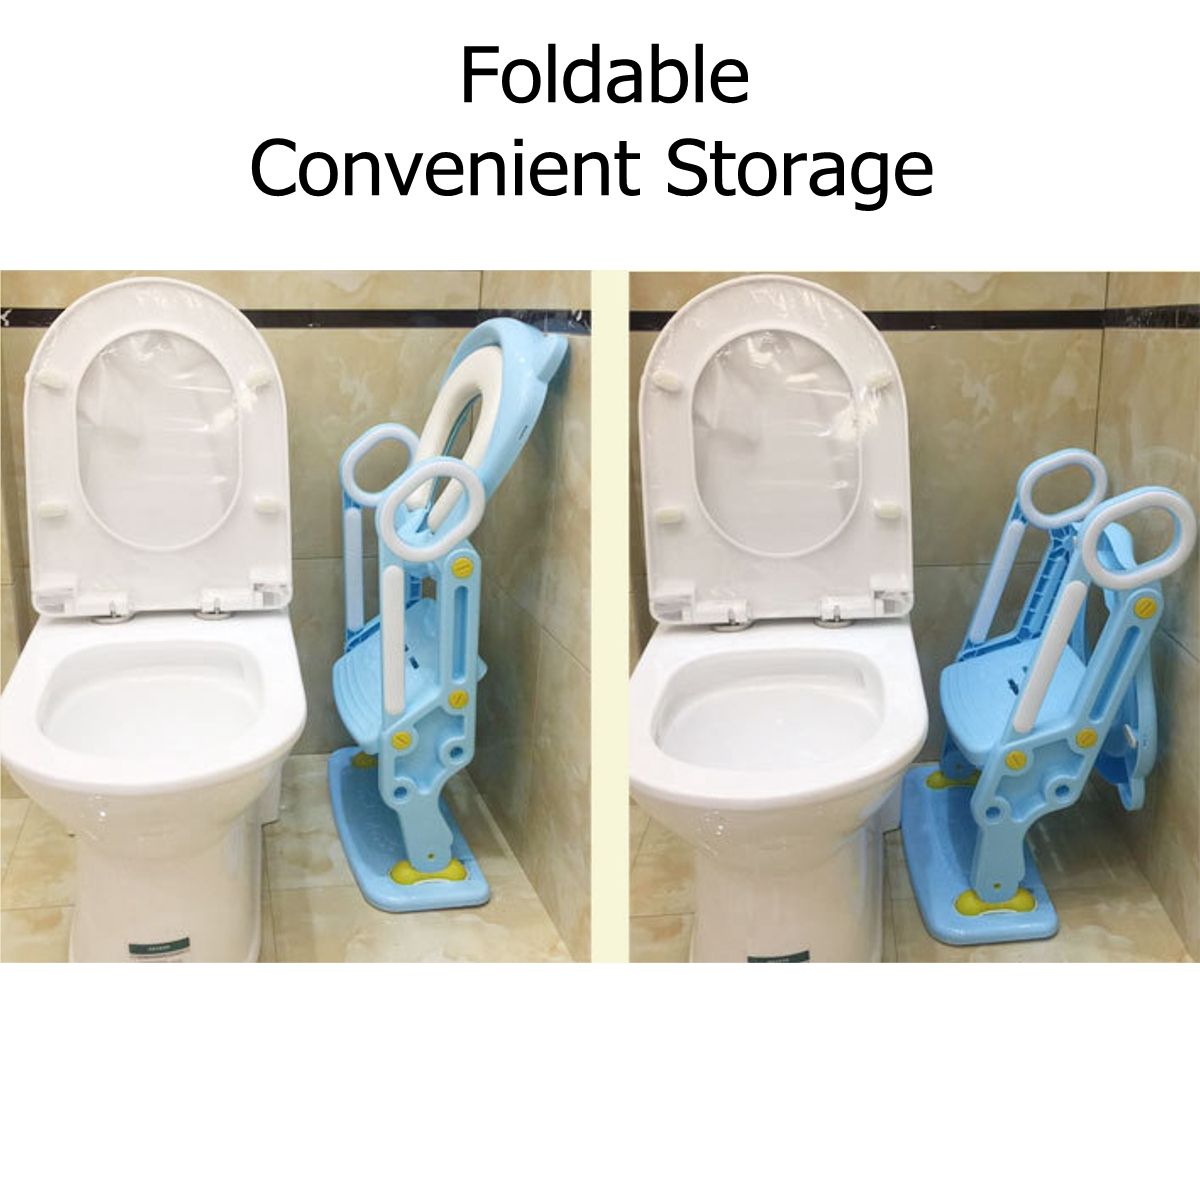 38018080-mm-Auxiliary-Toilet-Ladder-Kids-Potty-Training-Seat-1621007